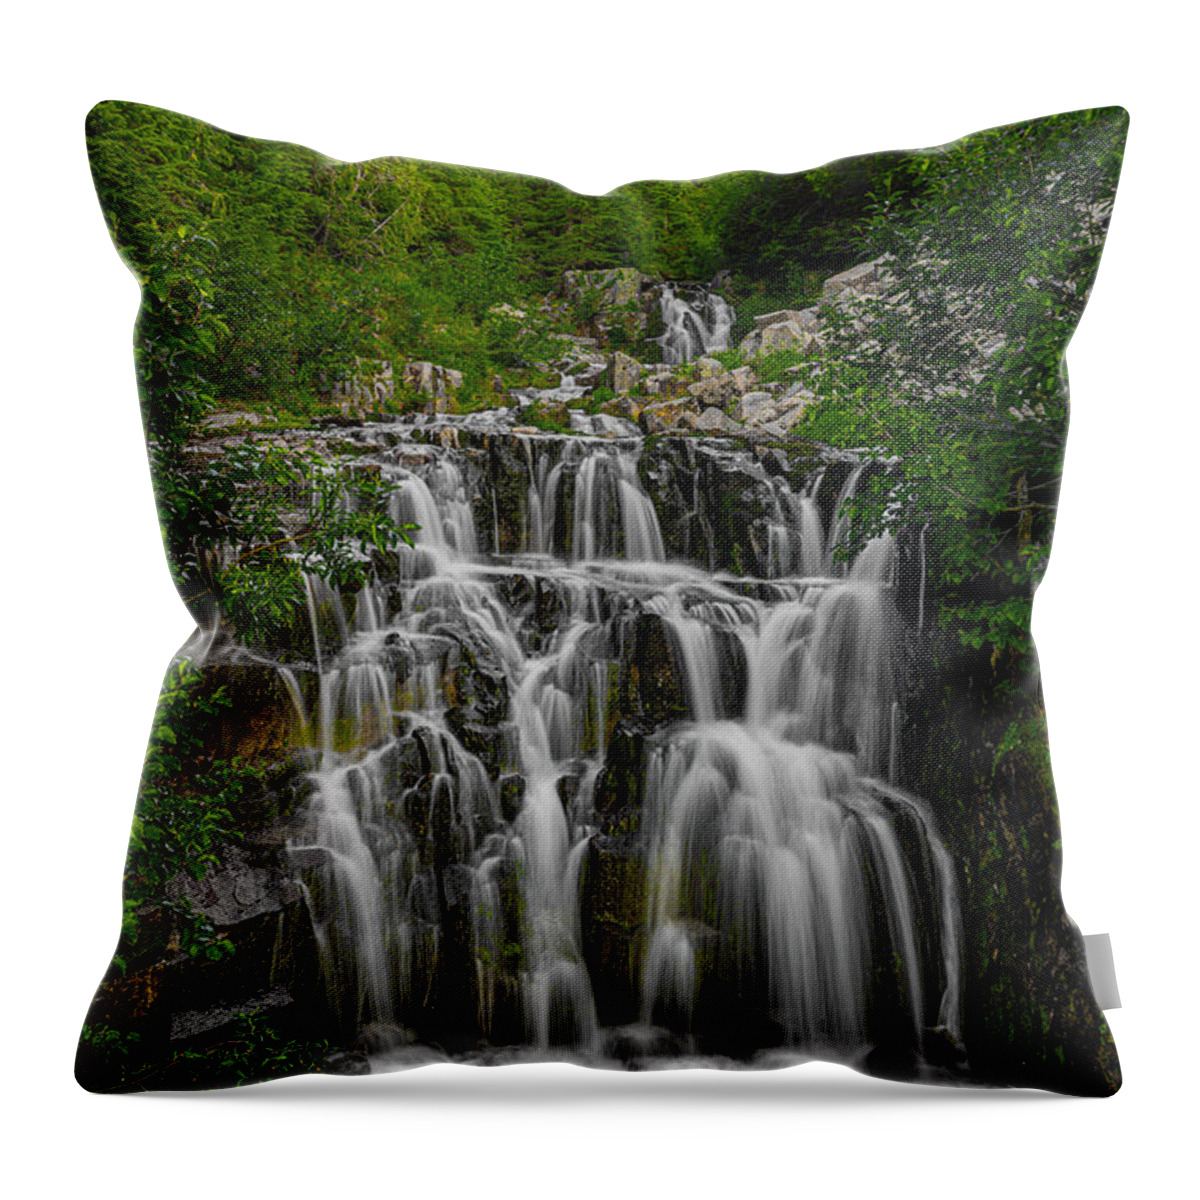 California Throw Pillow featuring the photograph Water fall in Mount Rainier National Park by Don Hoekwater Photography